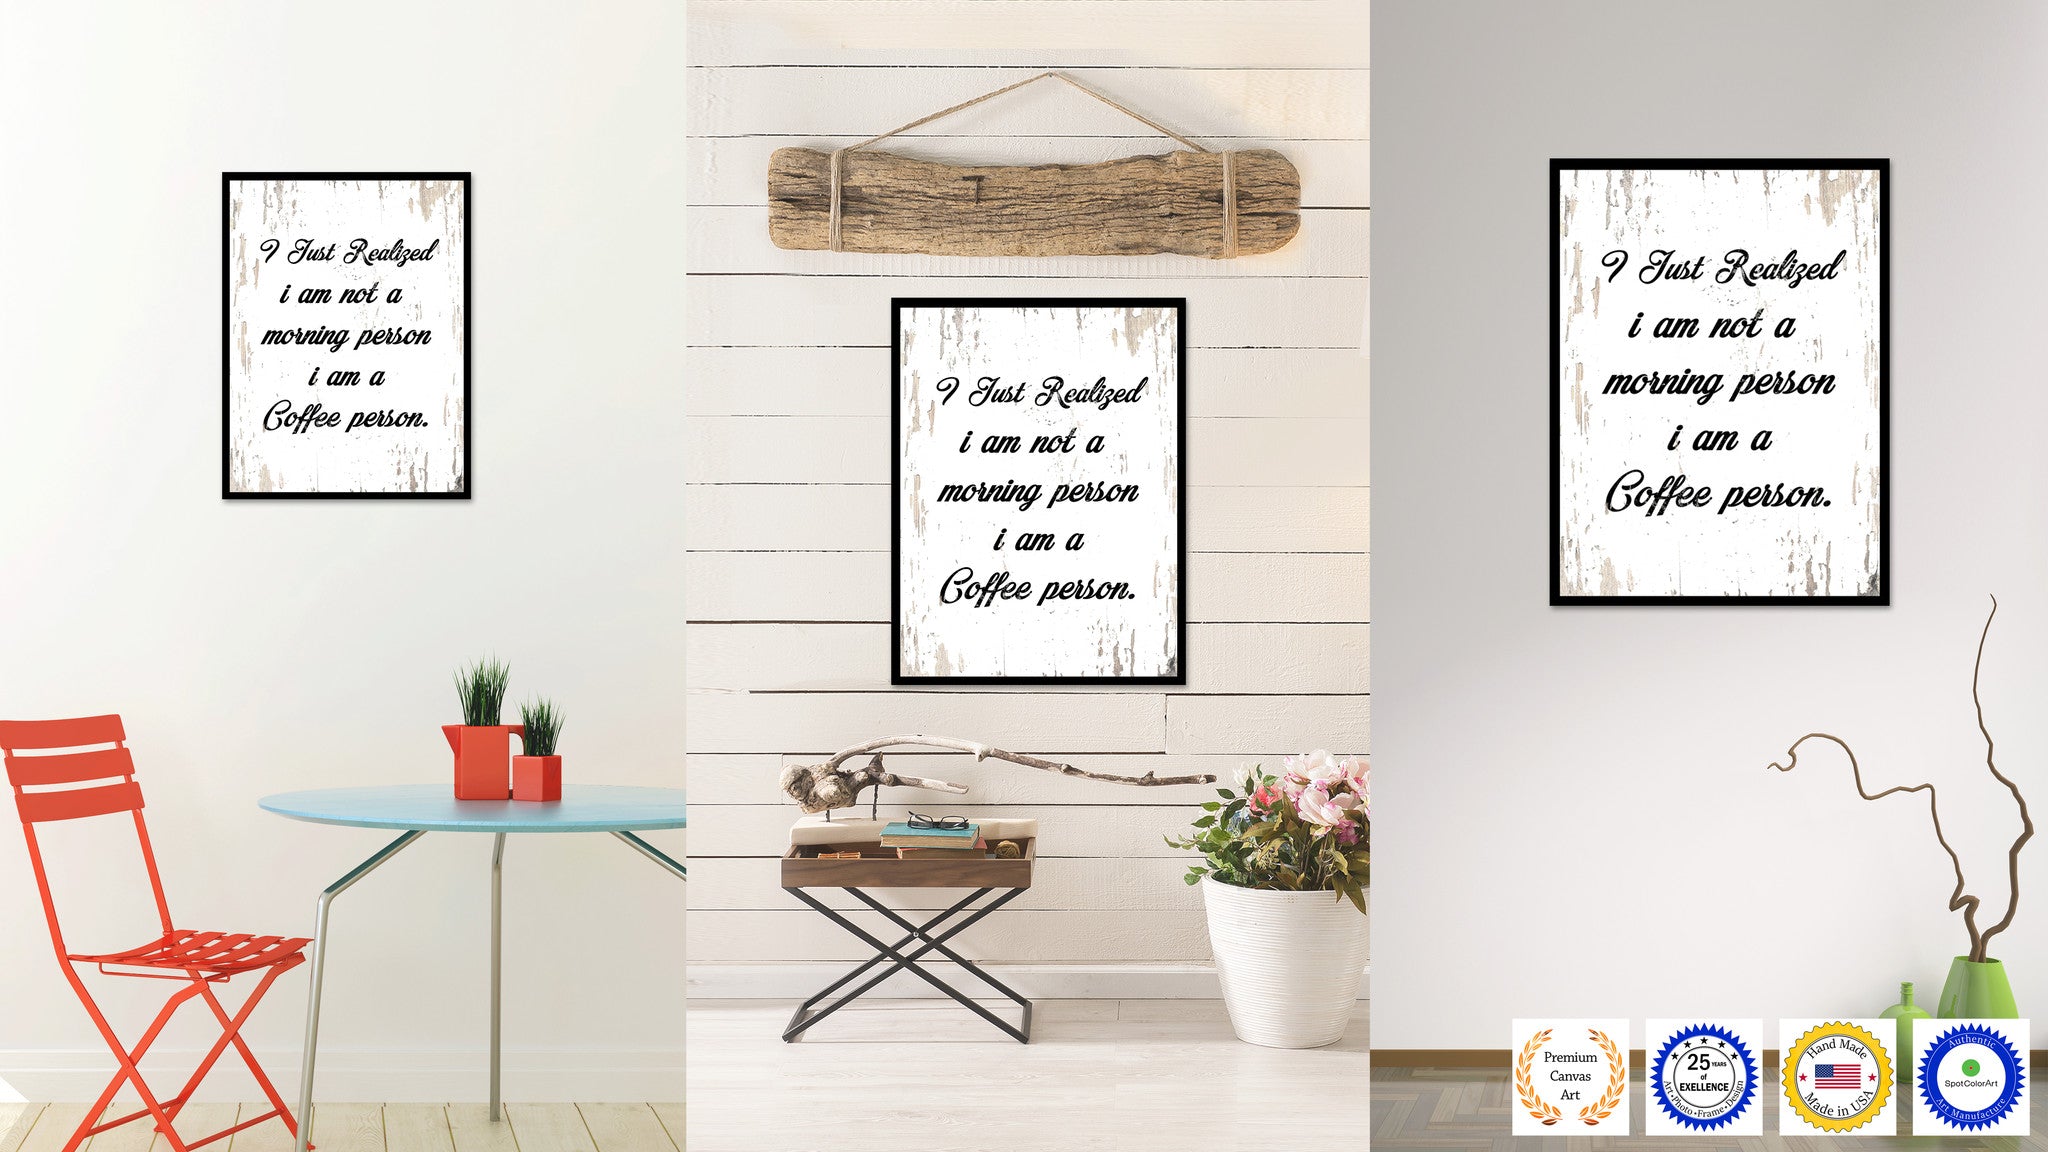 I Just Realized I Am Not A Morning Person I Am A Coffee Person Quote Saying Canvas Print with Picture Frame